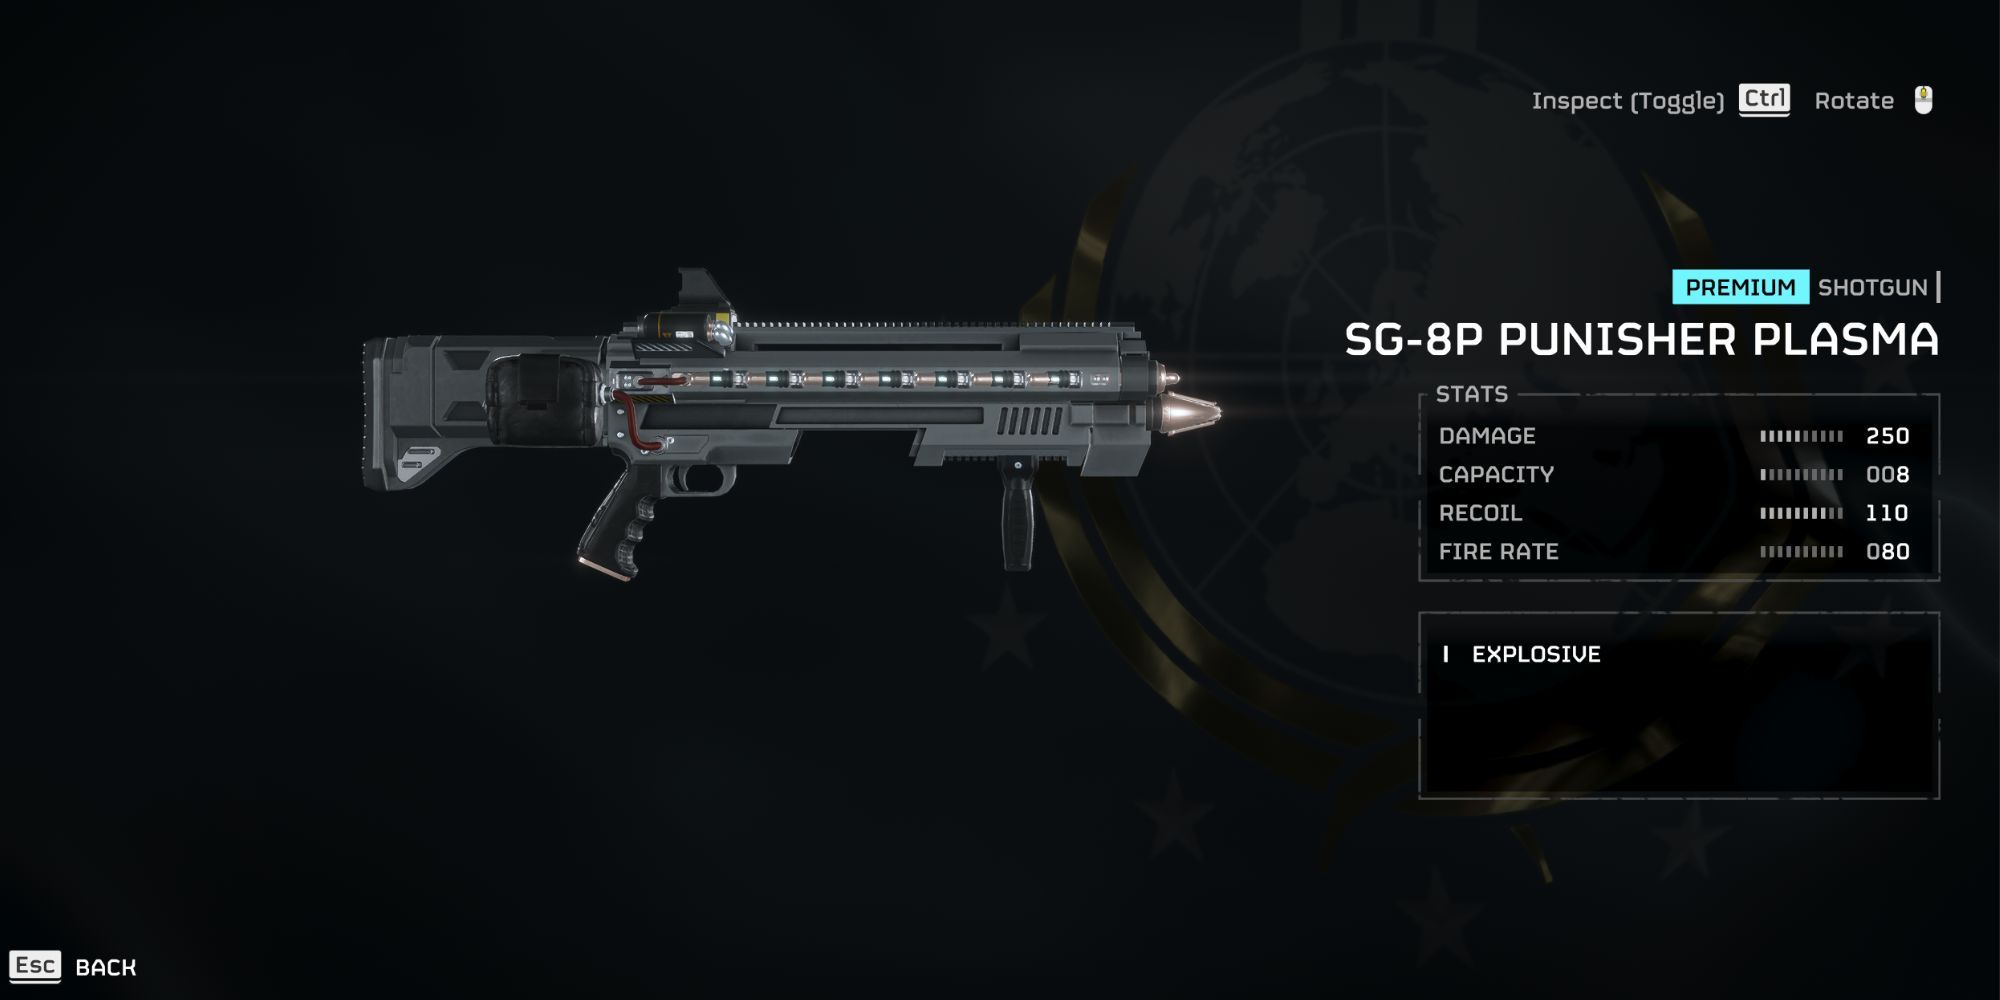 a close up view of the SG-8p Punisher Plasma energy based gun